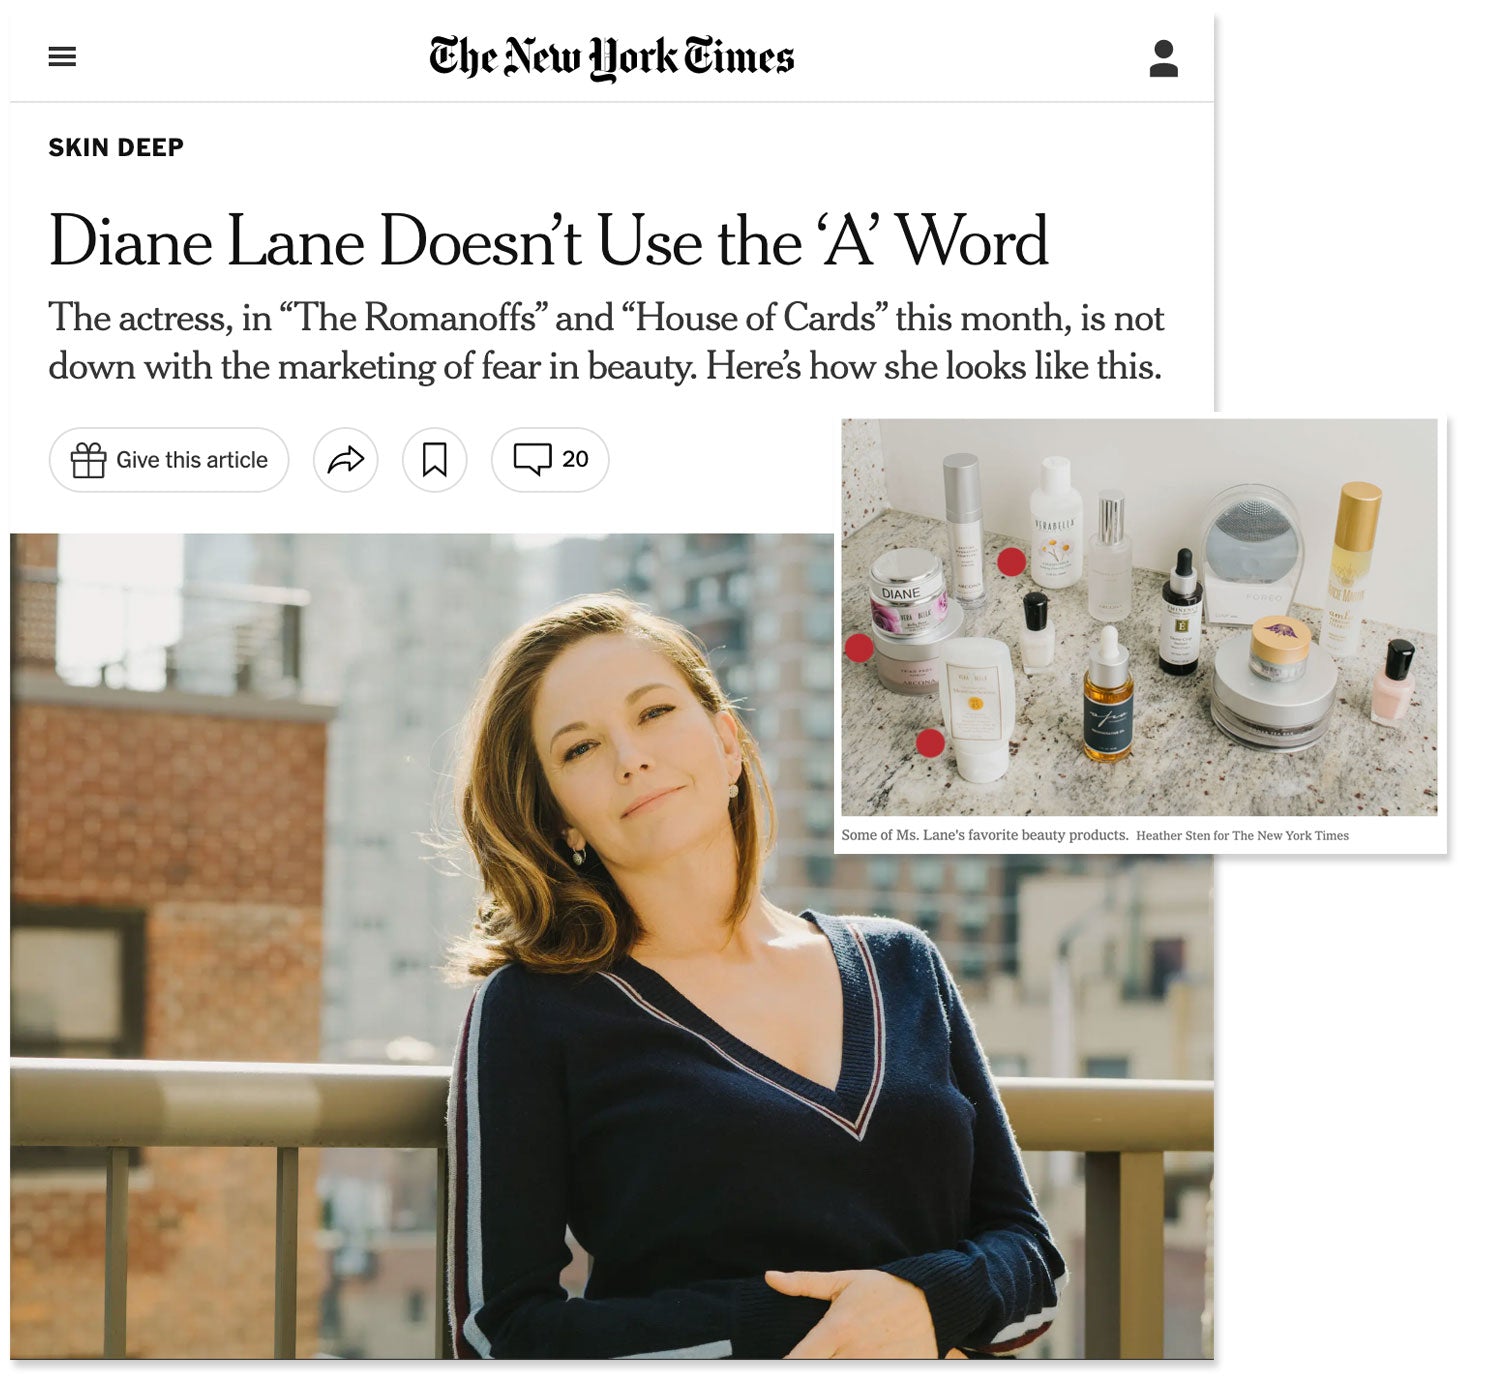 Diane Lane Doesn't Use the A Word - NYT and Verabella